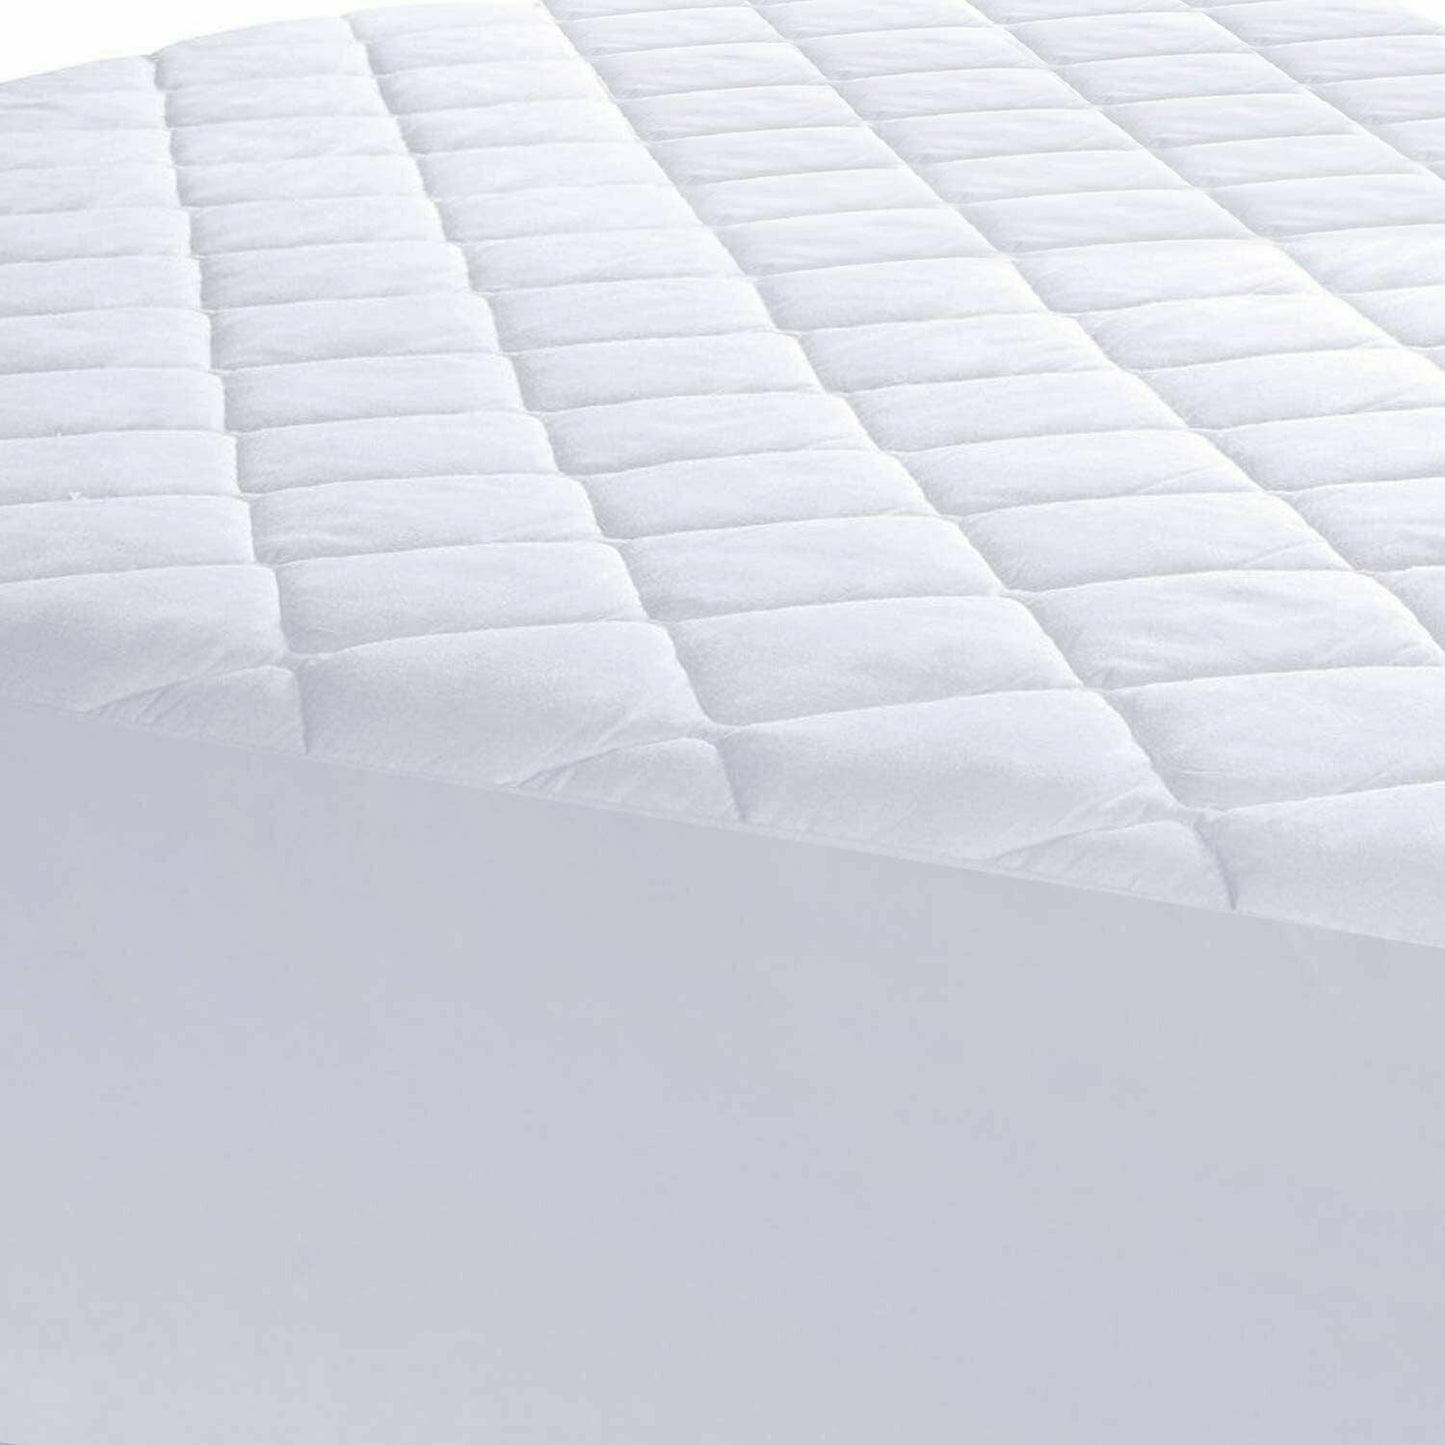 Egyptian Cotton Quilted Mattress Protectors